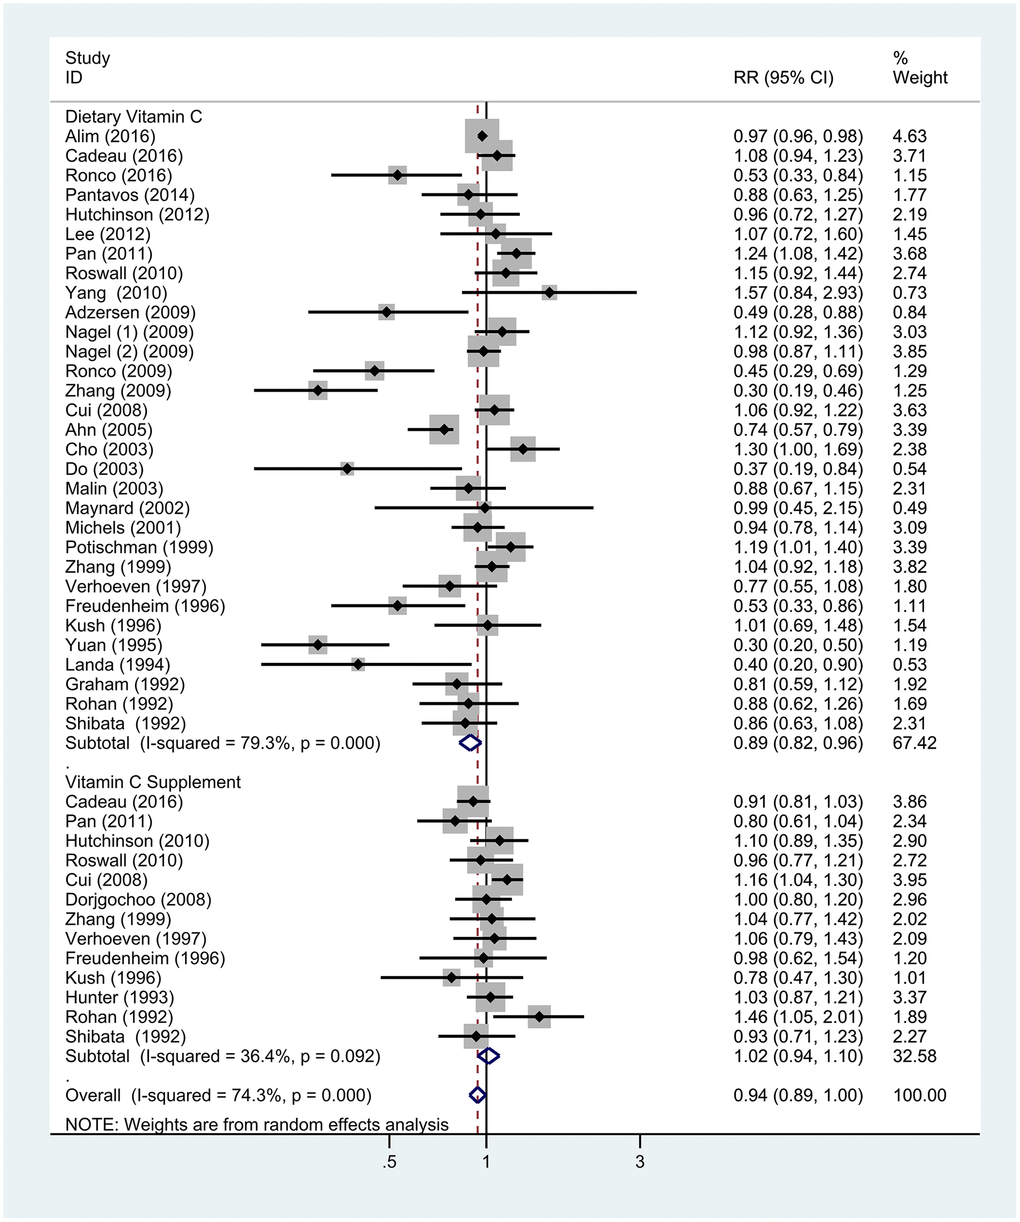 Subgroup analyses of the associations between breast cancer risk and specific sources of vitamin C. Note: Weights are from random-effects analysis. Abbreviations: RR, relative risk; CI, confidence interval.